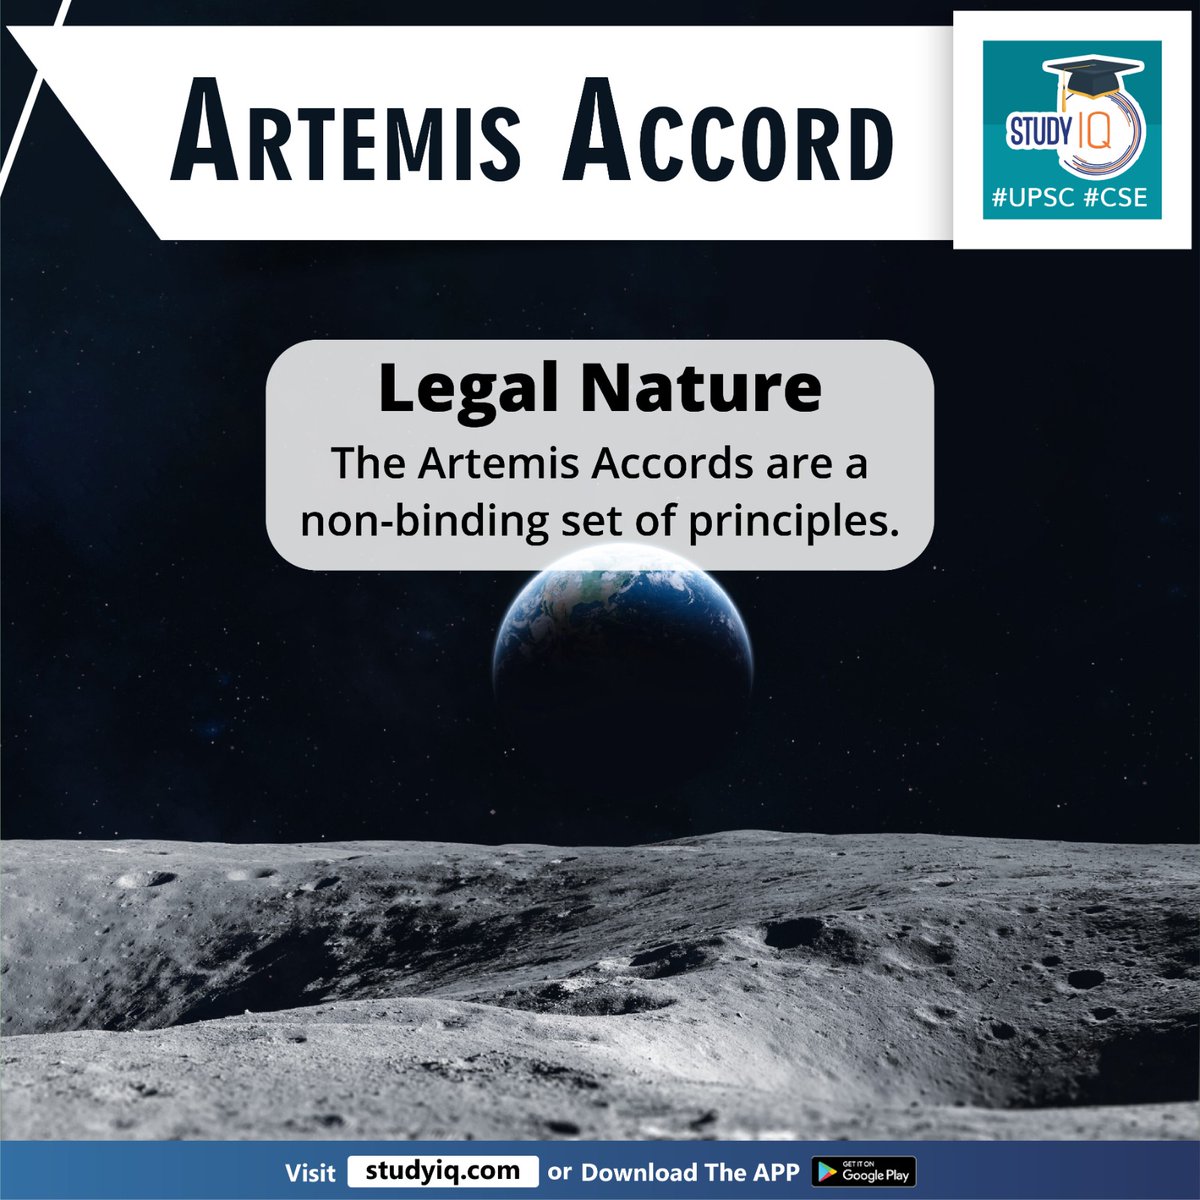 Artemis Accord

#artemisaccord #india #civilspaceexploration #spaceexploration #usa #outerspacetreaty #spacetreaty #spaceassets #spacemissions #scientificdata #explorationofspace #australia #bahrain #brazil #canda #colombia #france #italy #israel #japan #luxembourg #mexico…